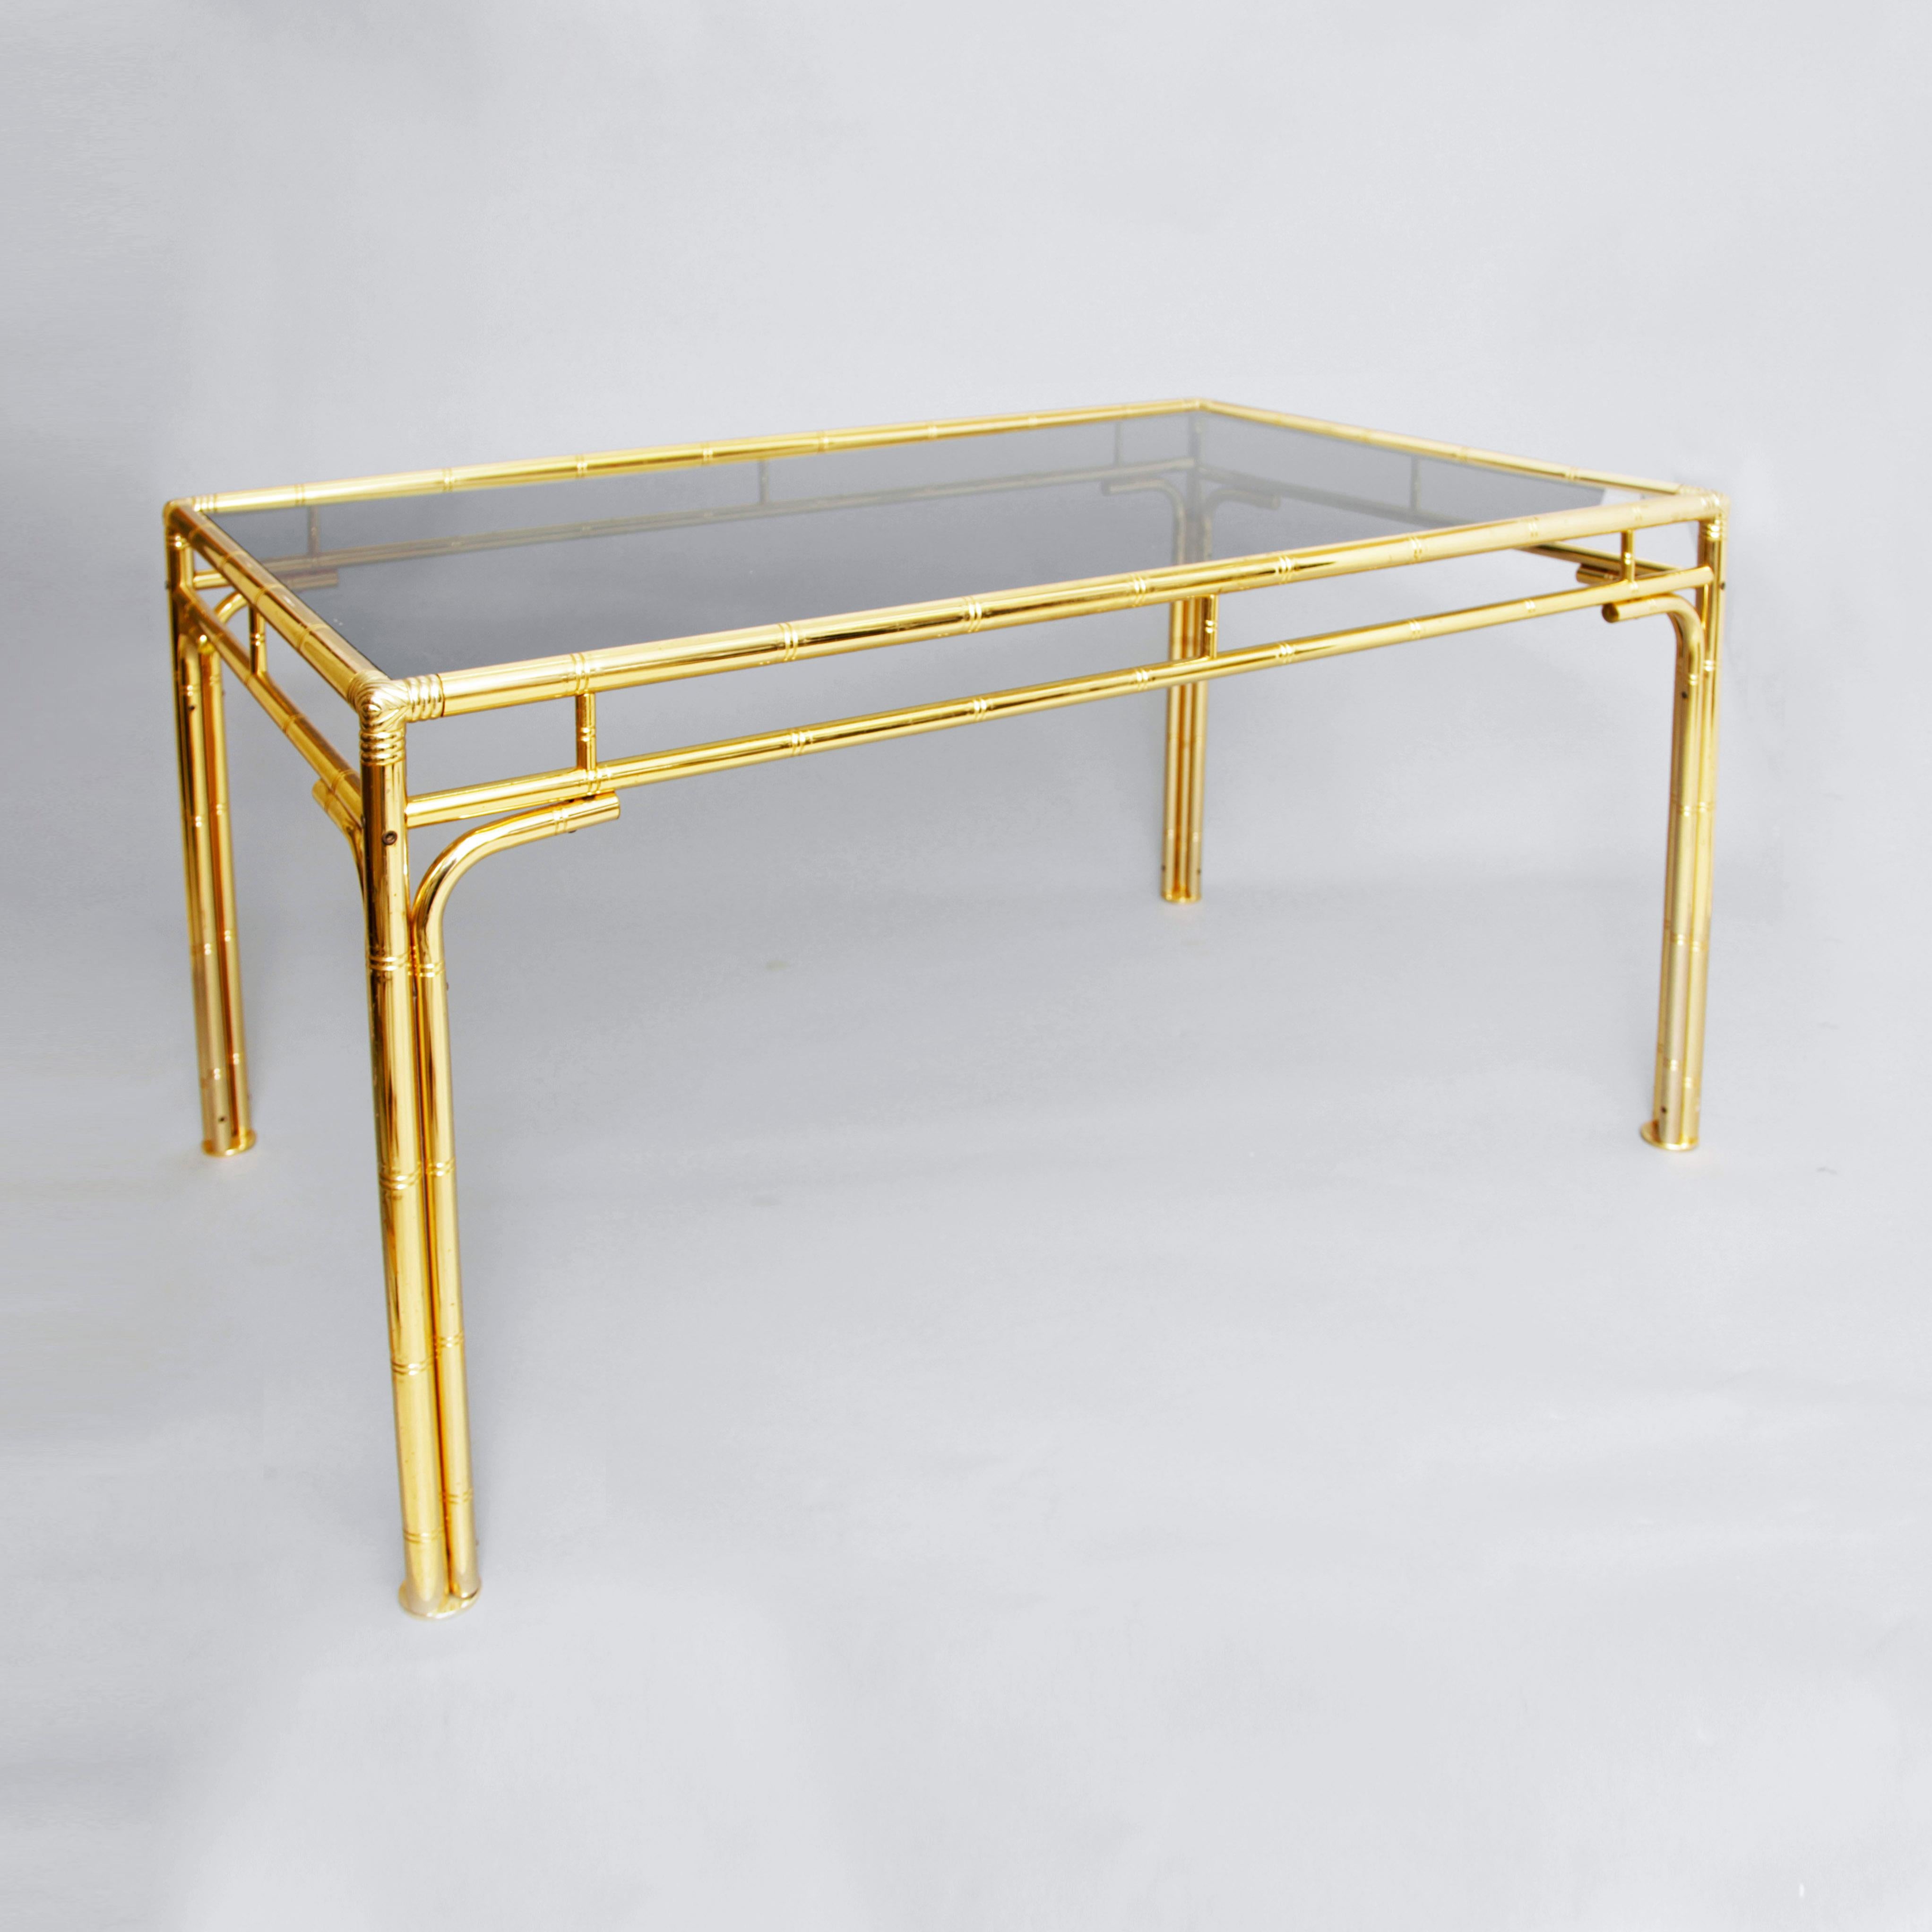 Elegant Hollywood Regency style brass faux bamboo dining table with smoked glass top.